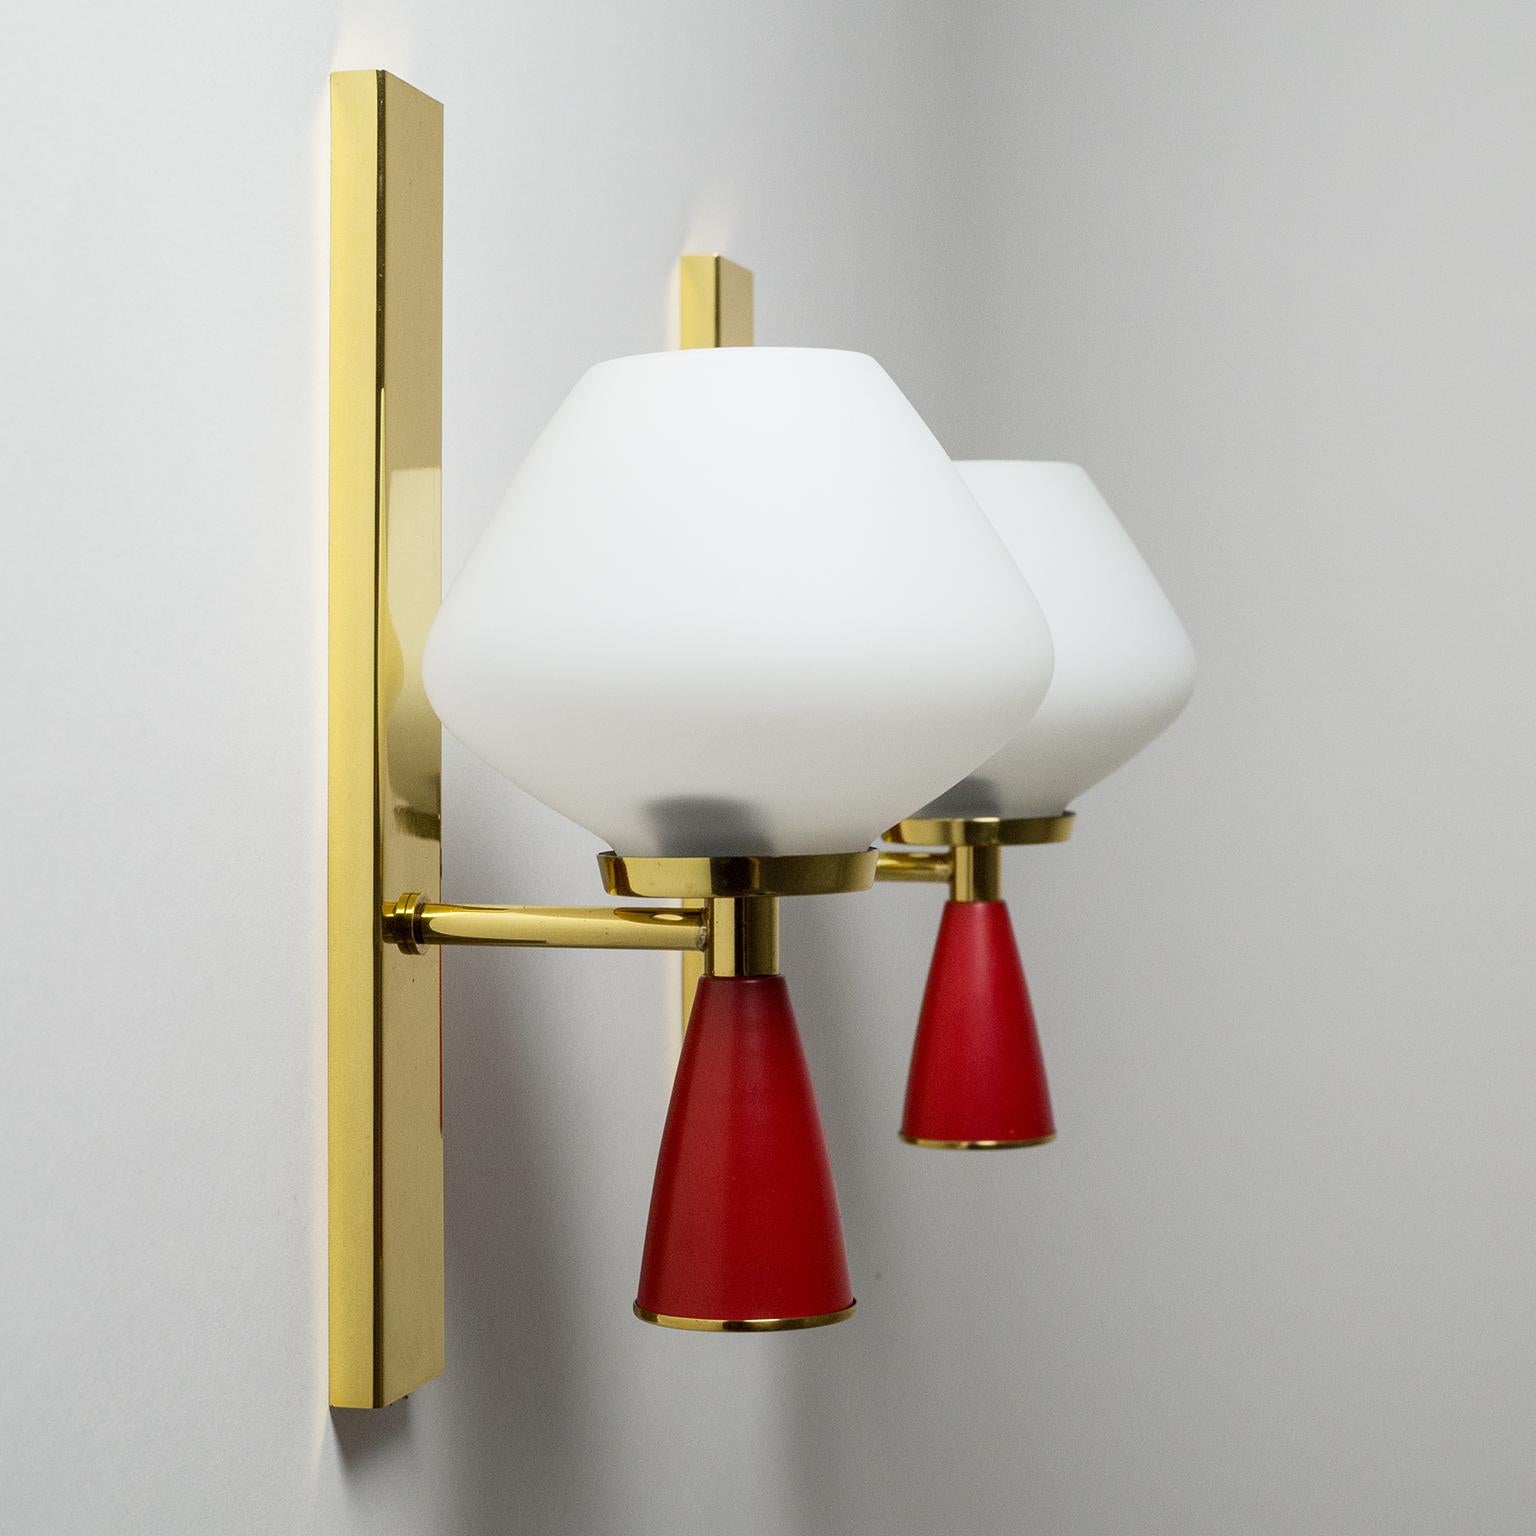 Frosted Italian Satin Glass Sconces, 1950s, Brass and Red